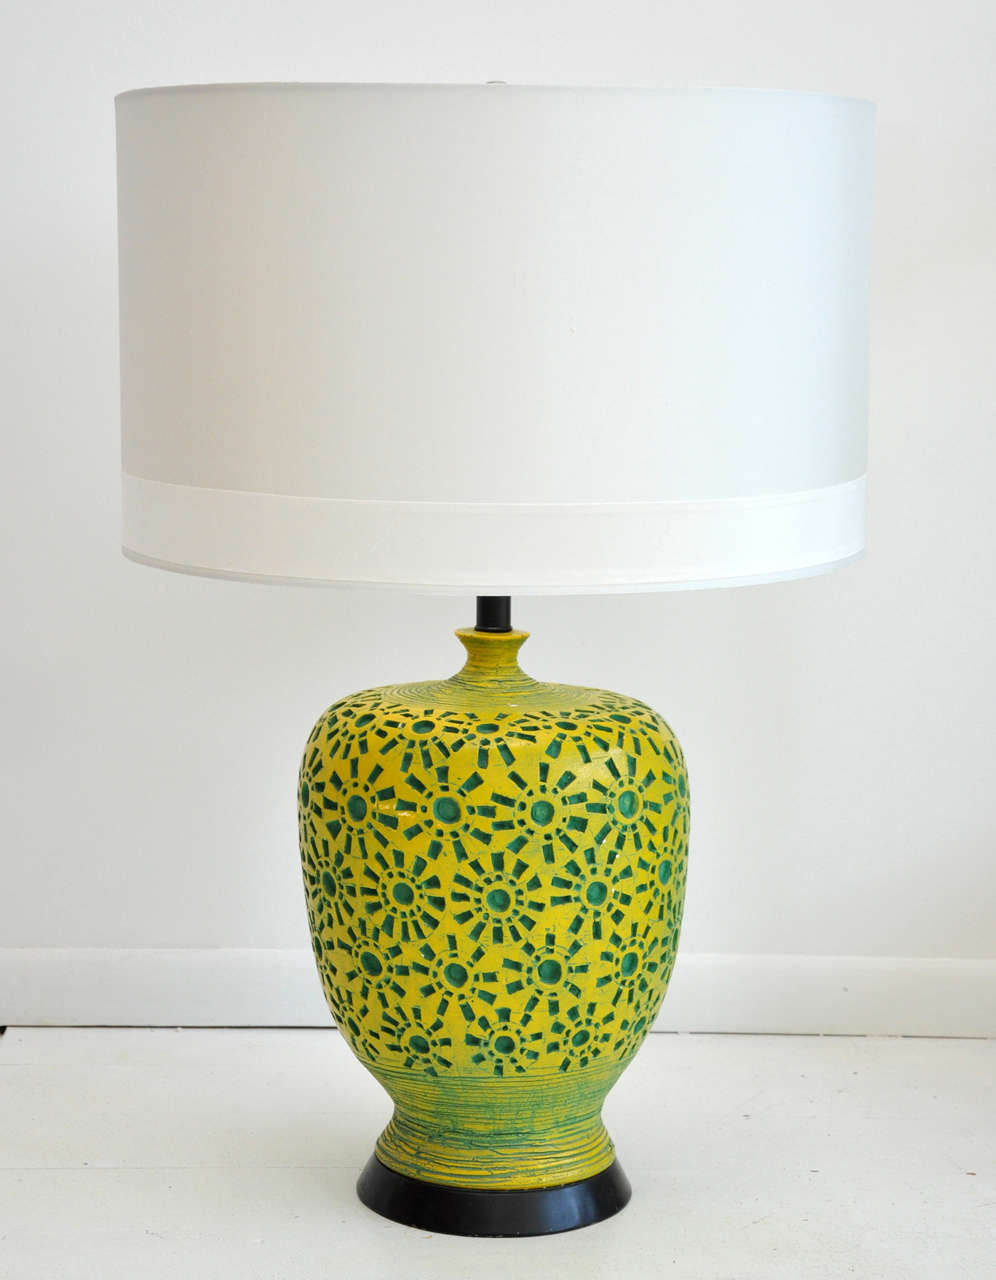 Colorful antique lamp base sure to brighten up any space! Shade and finial are new. Shade diameter is 21